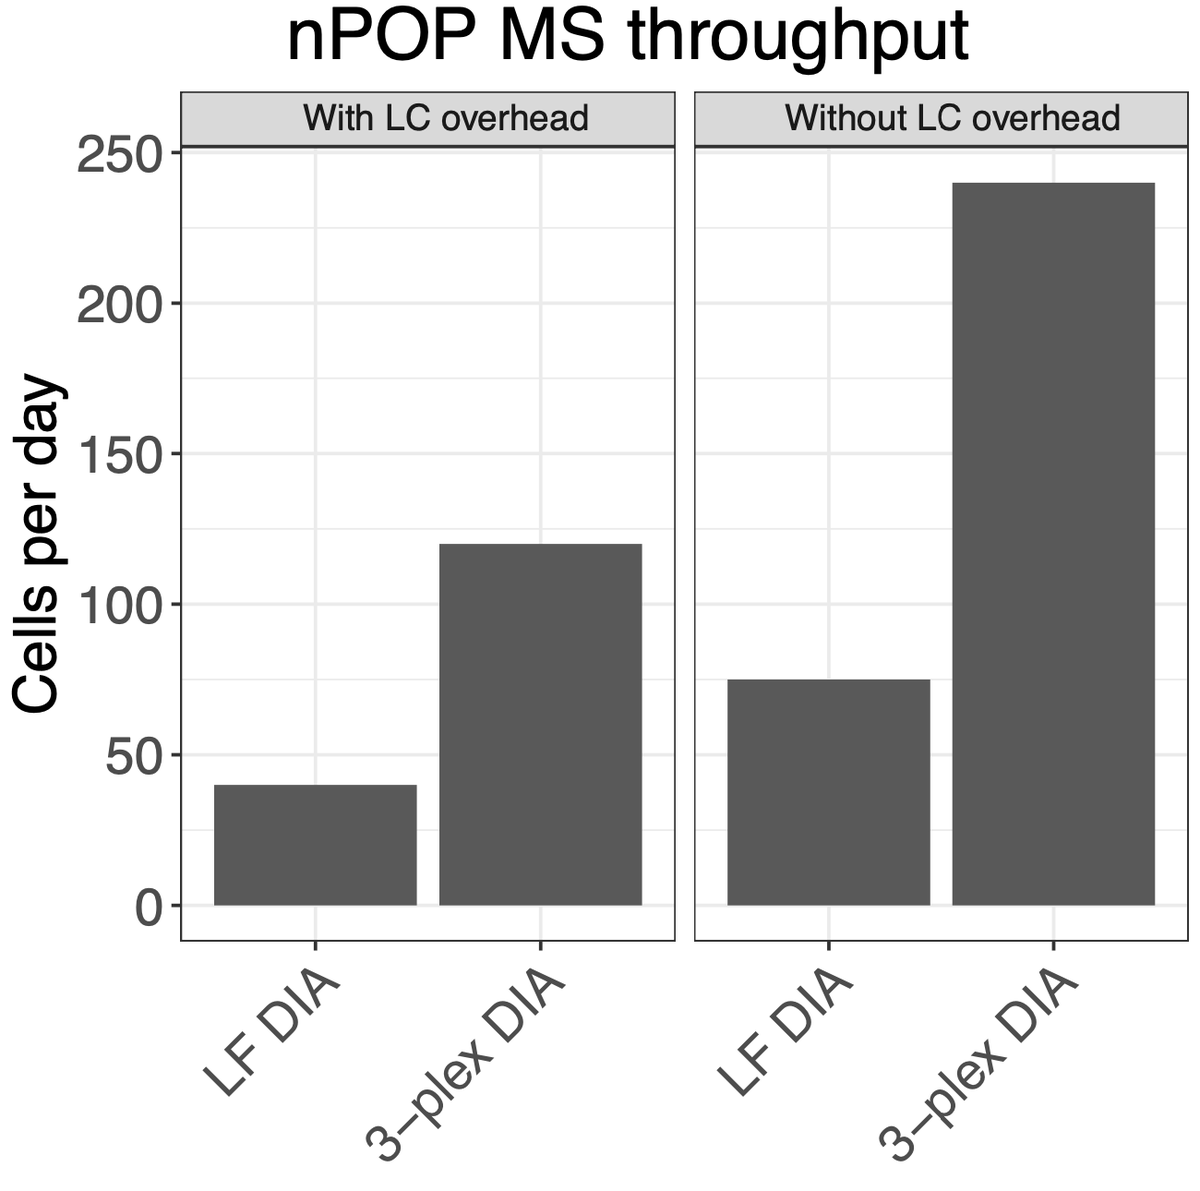 nPOP multiplexed sc sample prep increases throughput and preserves quantitative accuracy and coverage. 

Depth on TimsTOF Ultra was median 3200 proteins/cell.

biorxiv.org/content/10.110…